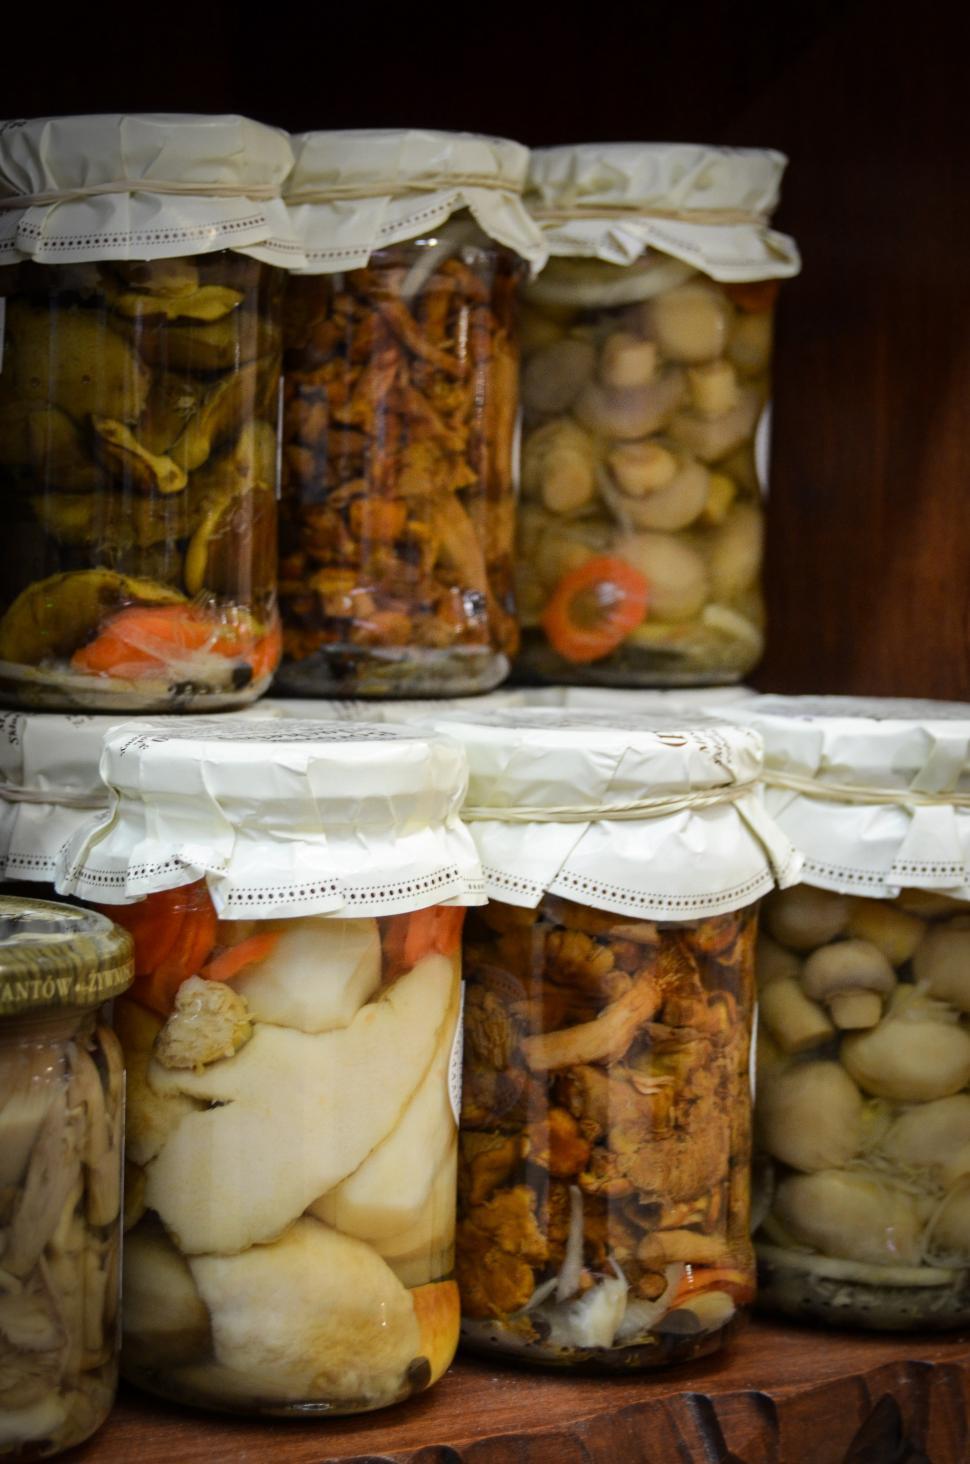 Free Image of Shelf Filled With Jars of Various Foods 